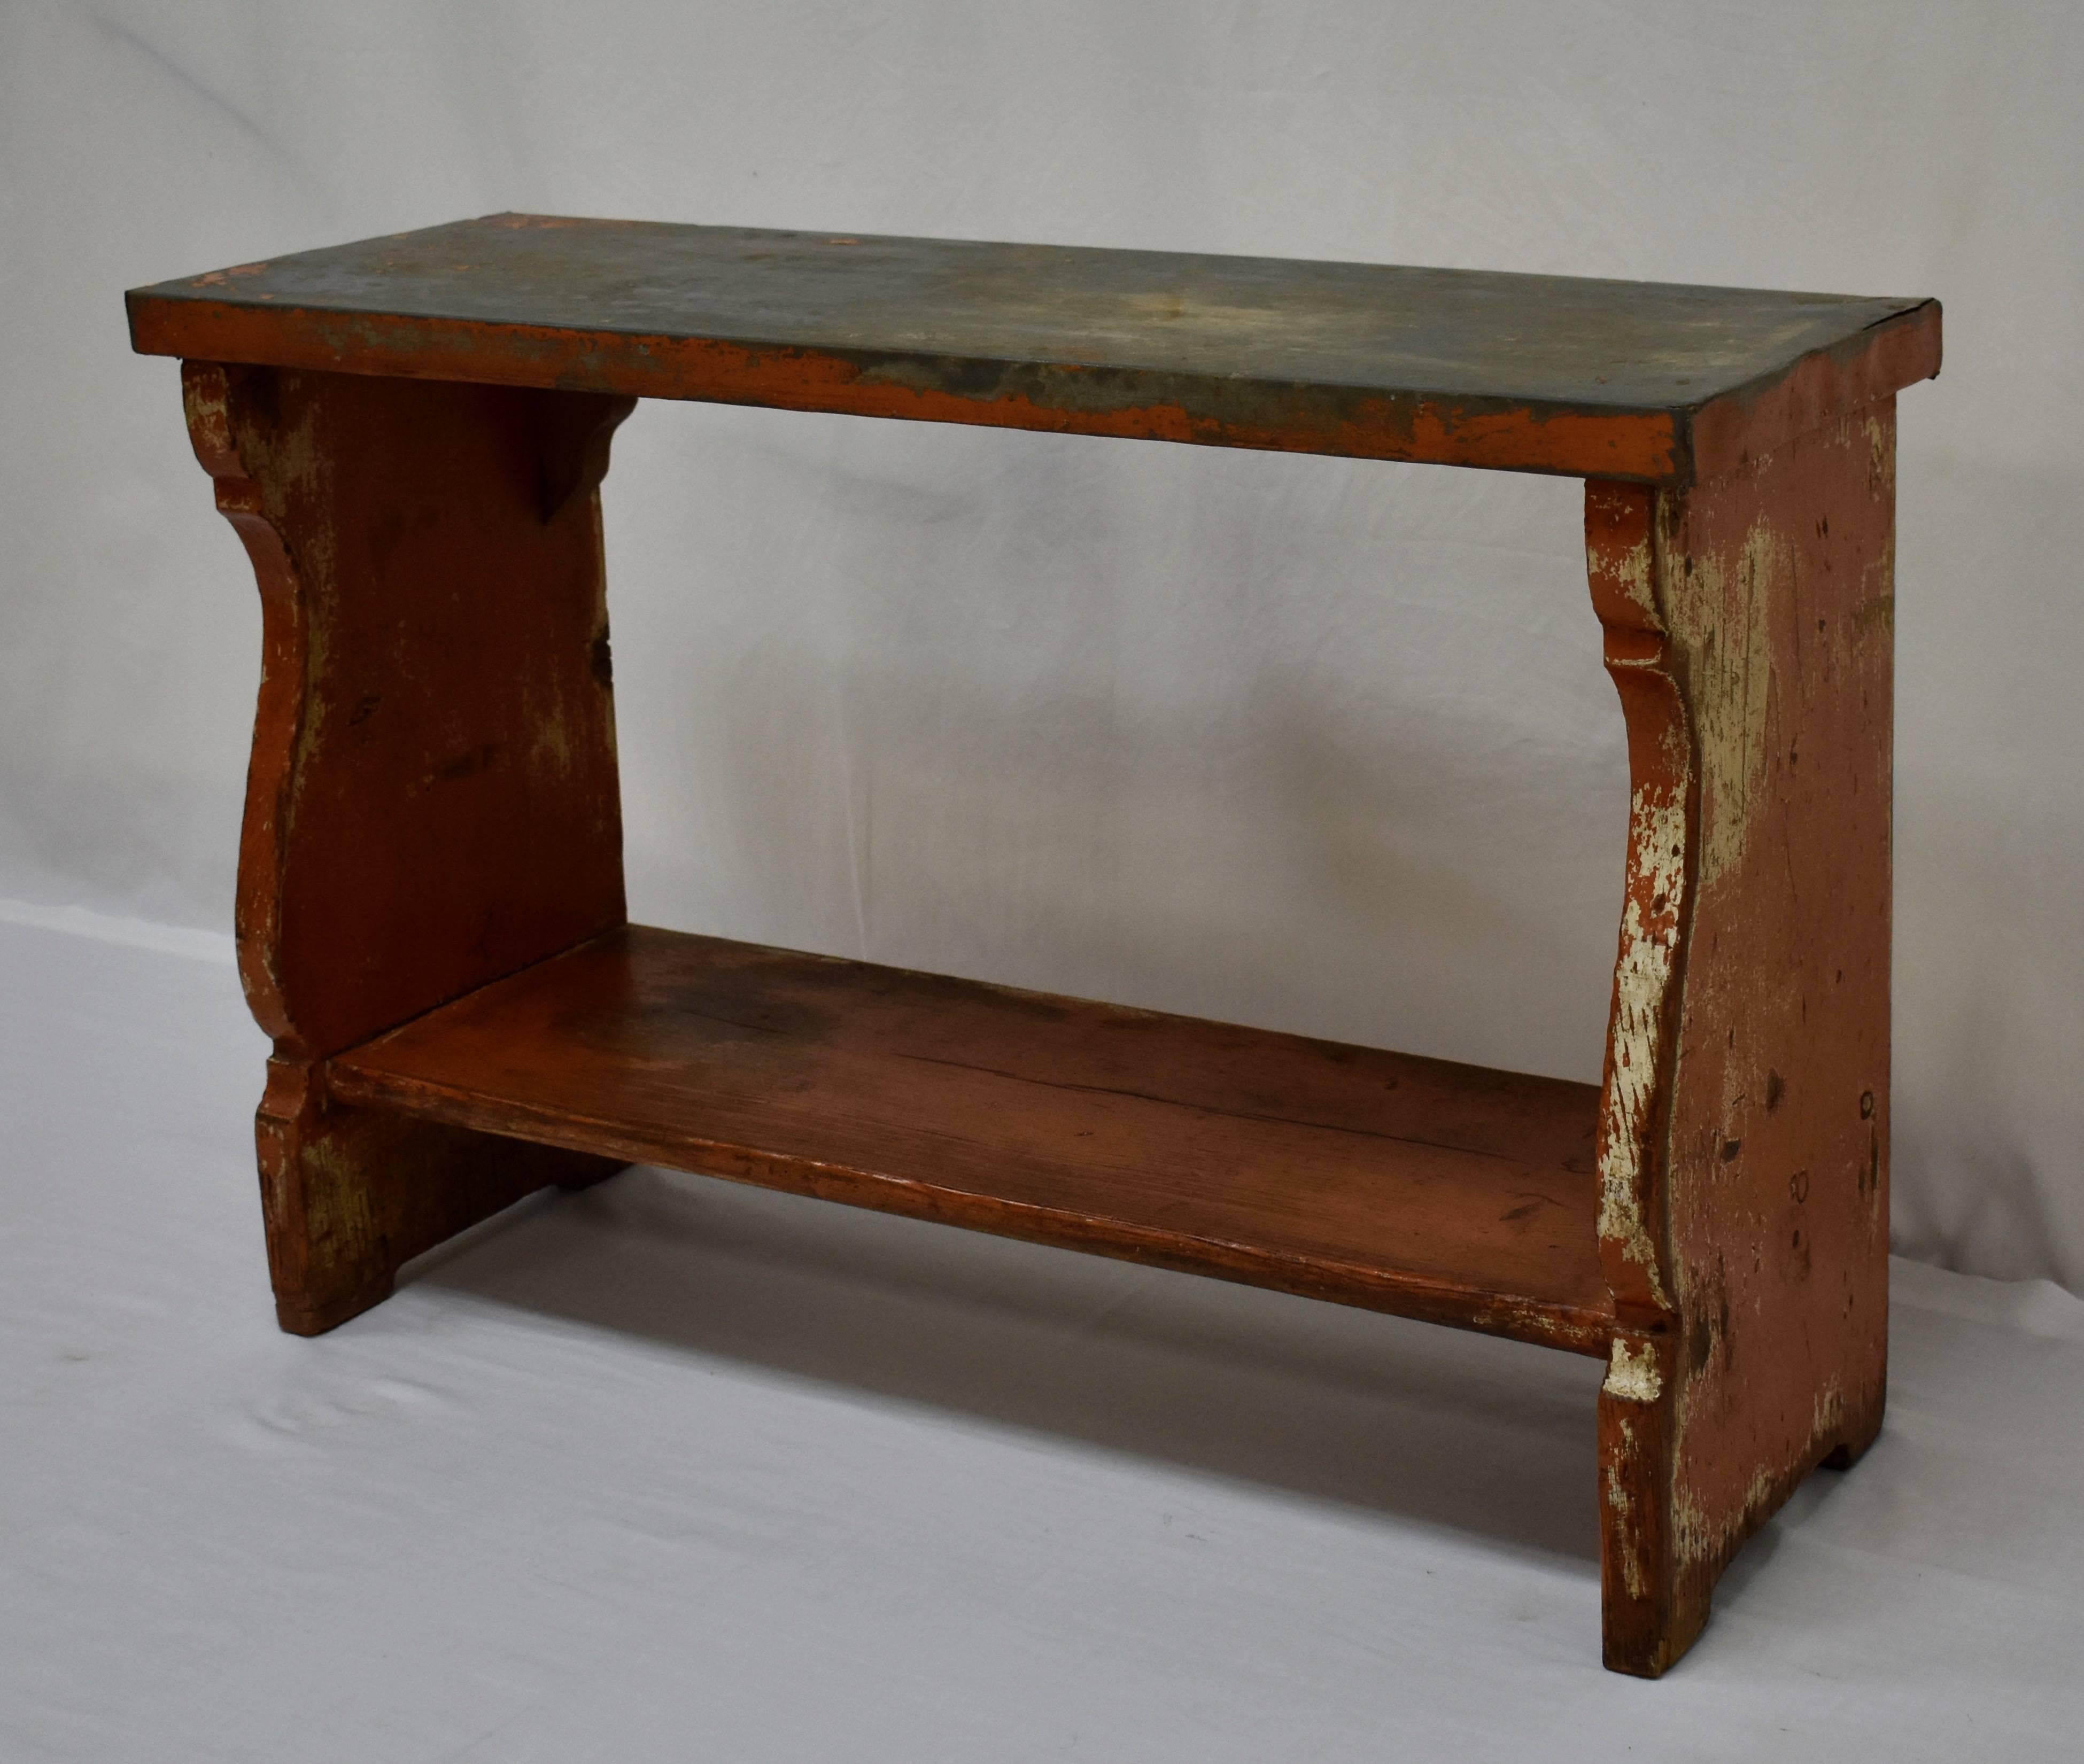 20th Century Pine Painted Zinc-Topped Water Bench